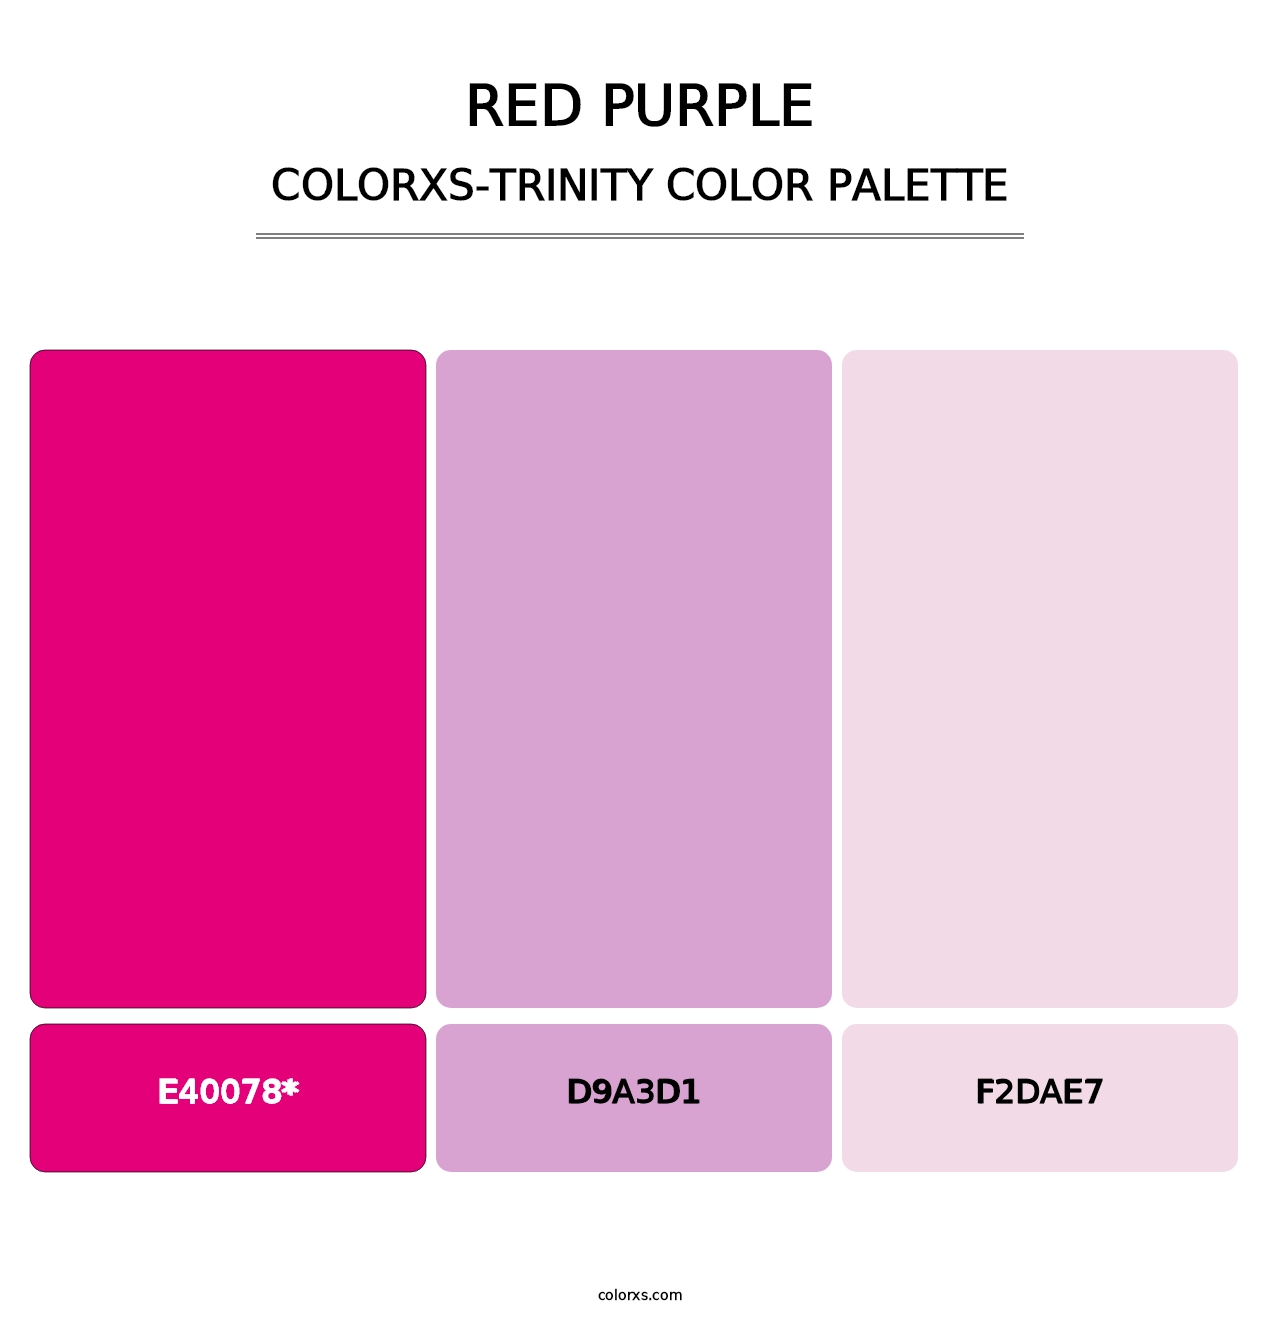 Red Purple - Colorxs Trinity Palette